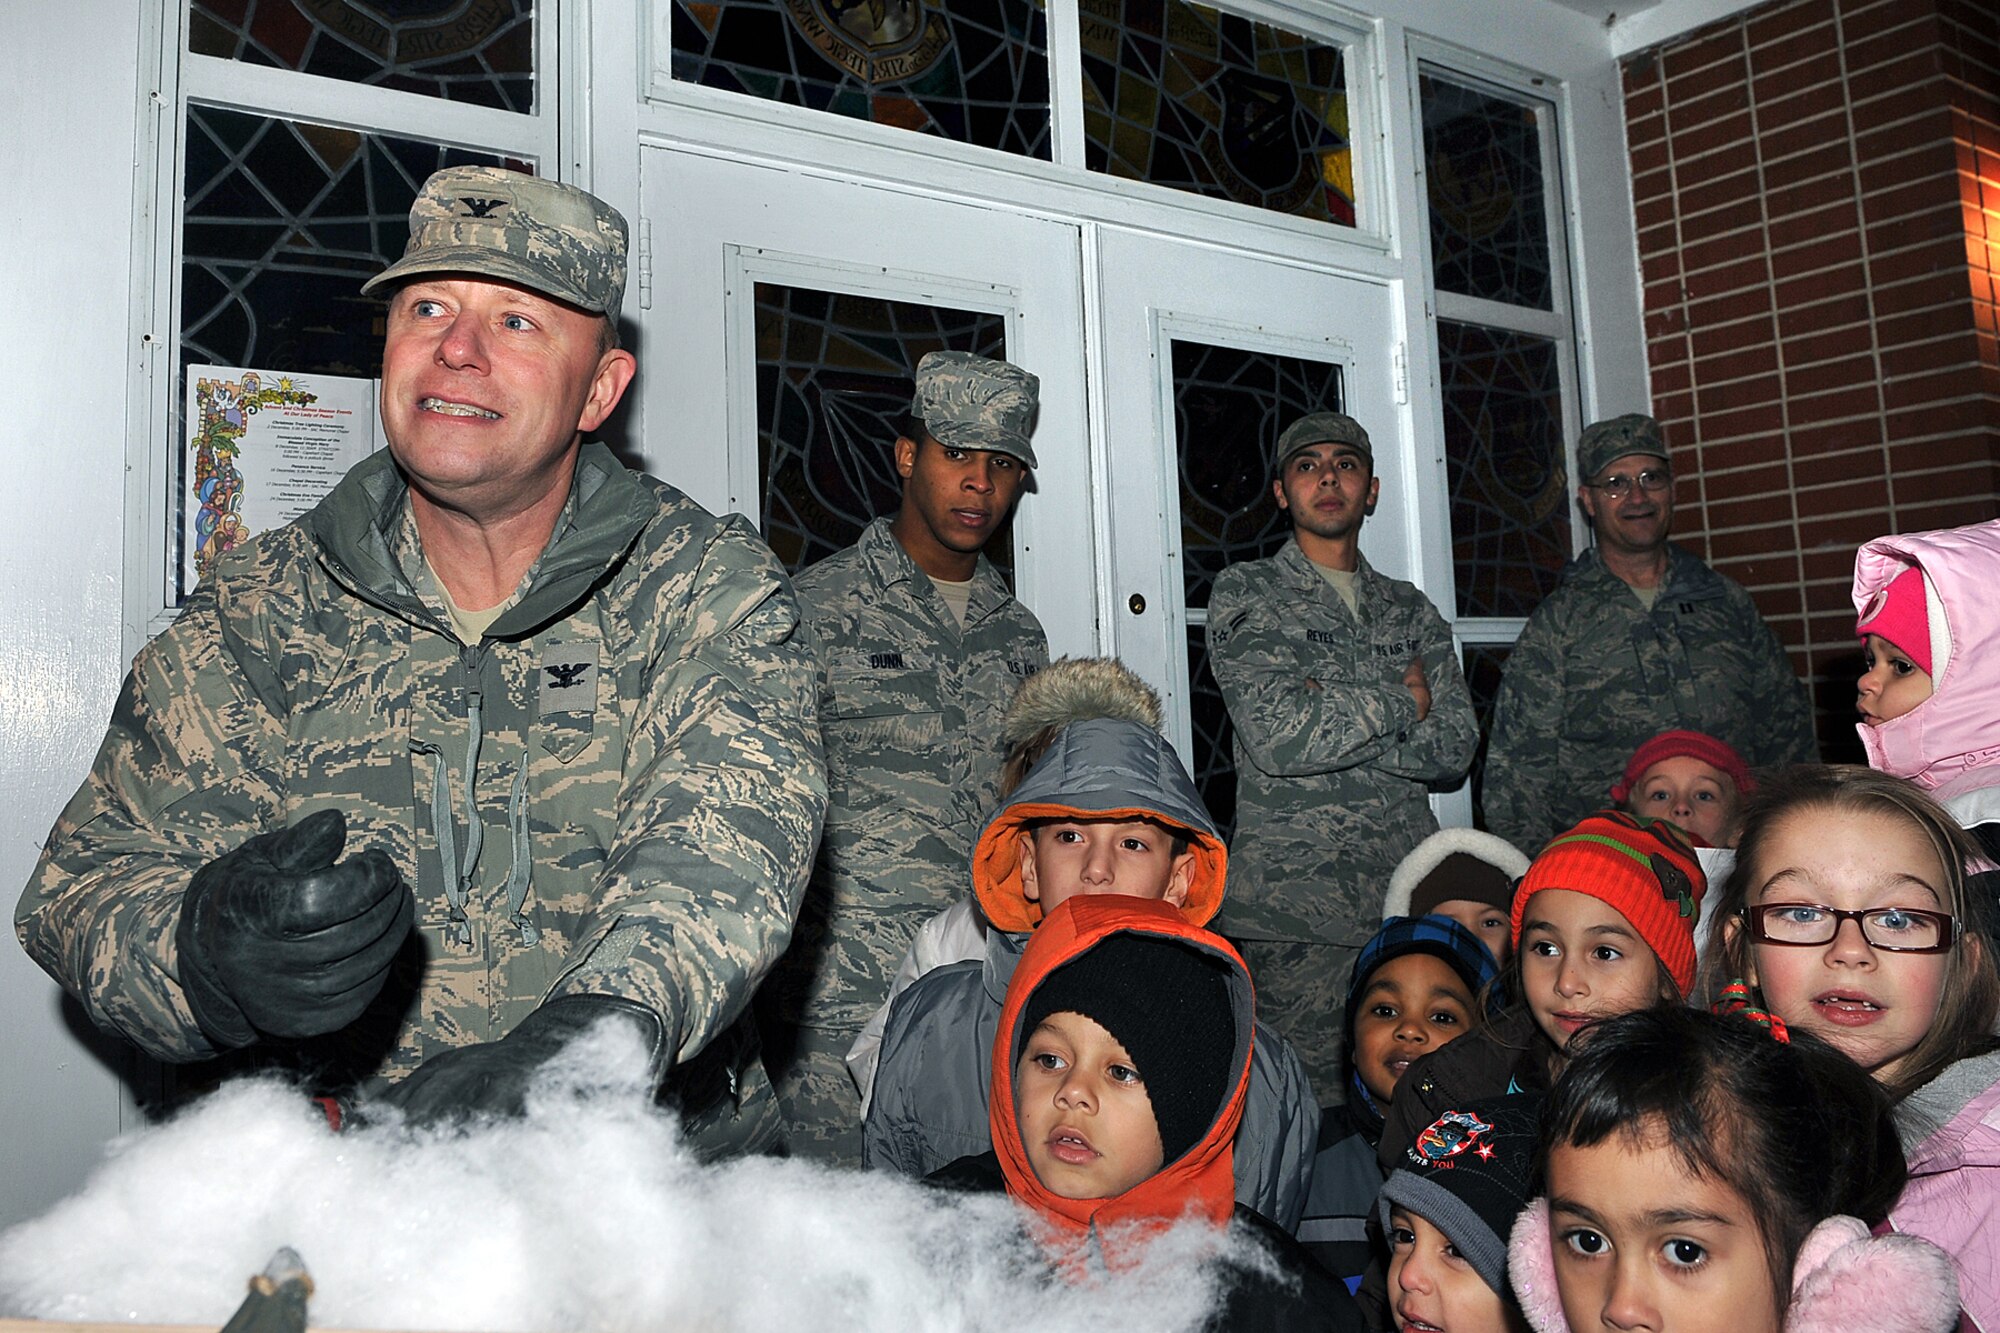 OFFUTT AIR FORCE BASE, Neb. - Col. Michael Allshouse, 55th Mission Support Group commander, lifts the light switch while children from the Offutt community watch during the tree lighting and holiday events outside the SAC Memorial Chapel Dec. 2. This annual event provides Team Offutt member and their families a fun environment to share their joy and give presents to their love ones this Christmas season.  U.S. Air Force Photo by Charles Haymond